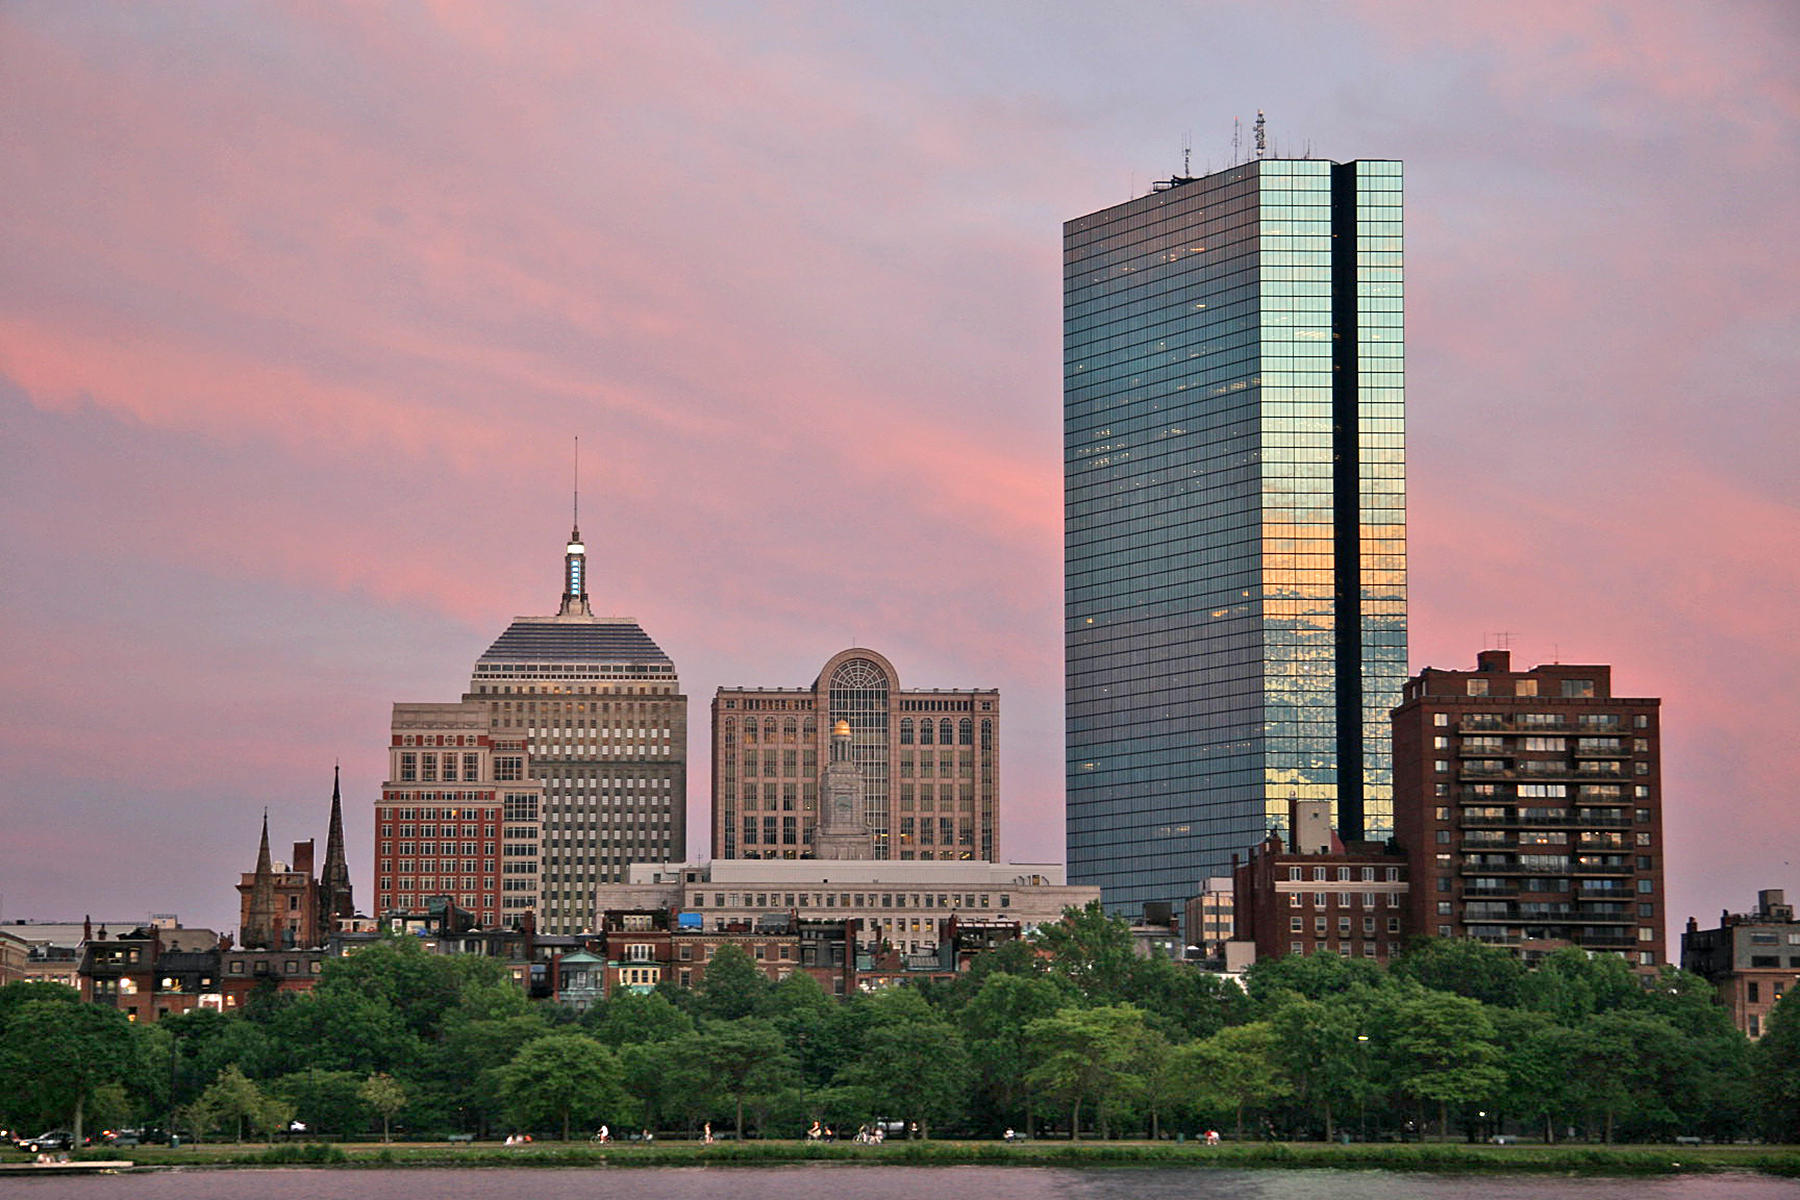 Esplinade, I.M. Pei's Hancock Tower and Boston Skyline from Charles River<p><a class="nav-link" href="/content.html?page=6/#TA7" target="_top">Thumbnail</a>